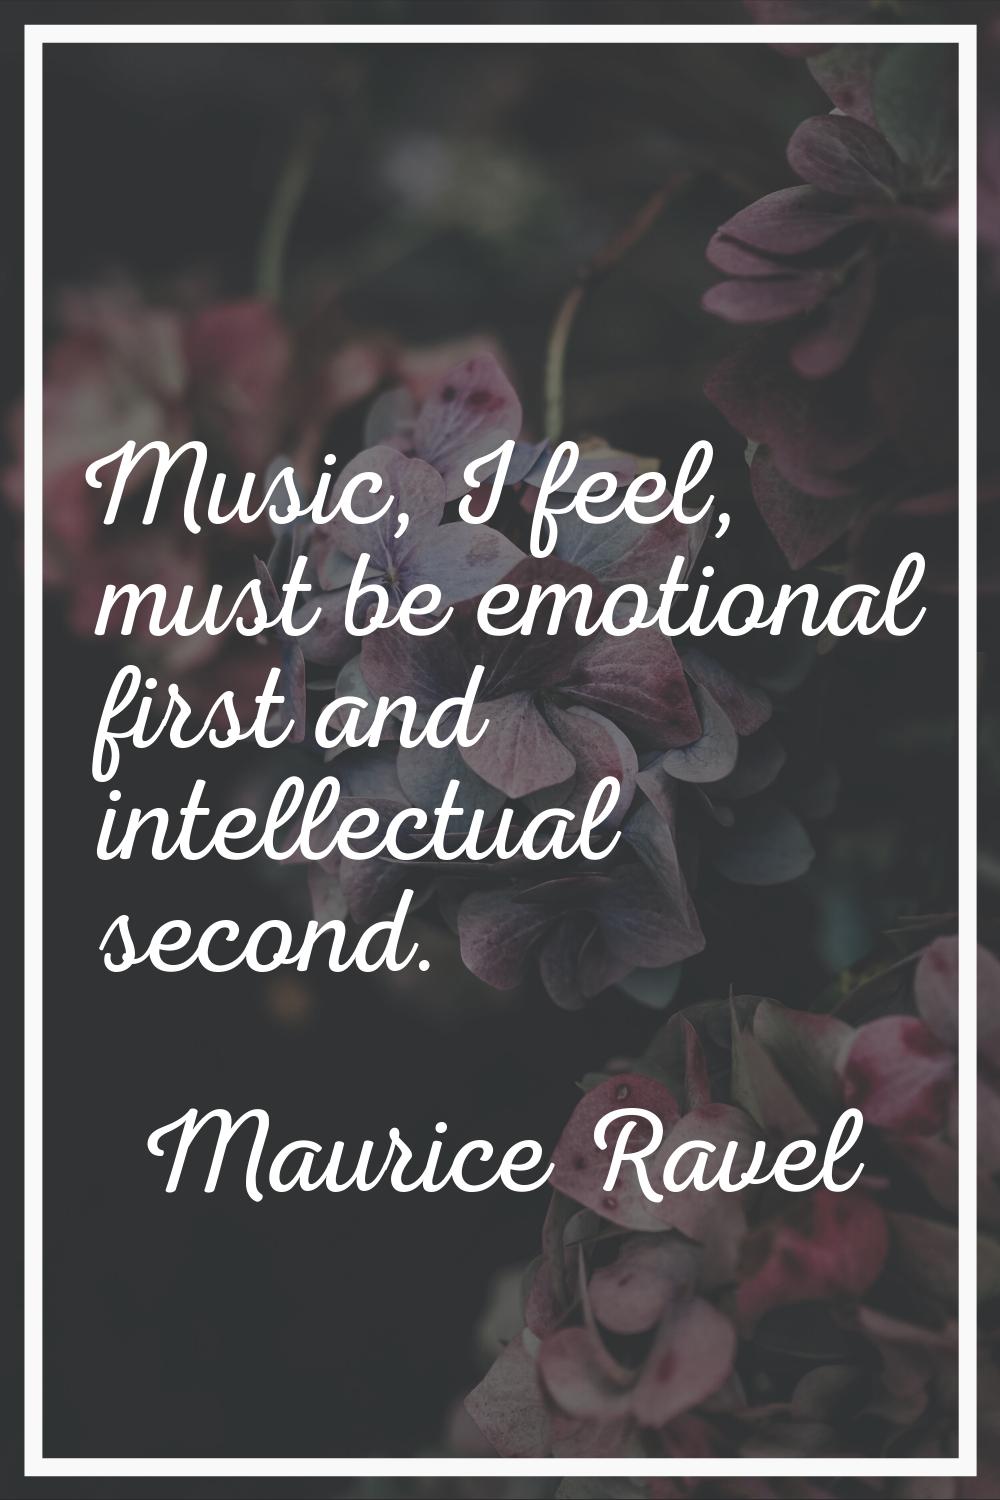 Music, I feel, must be emotional first and intellectual second.